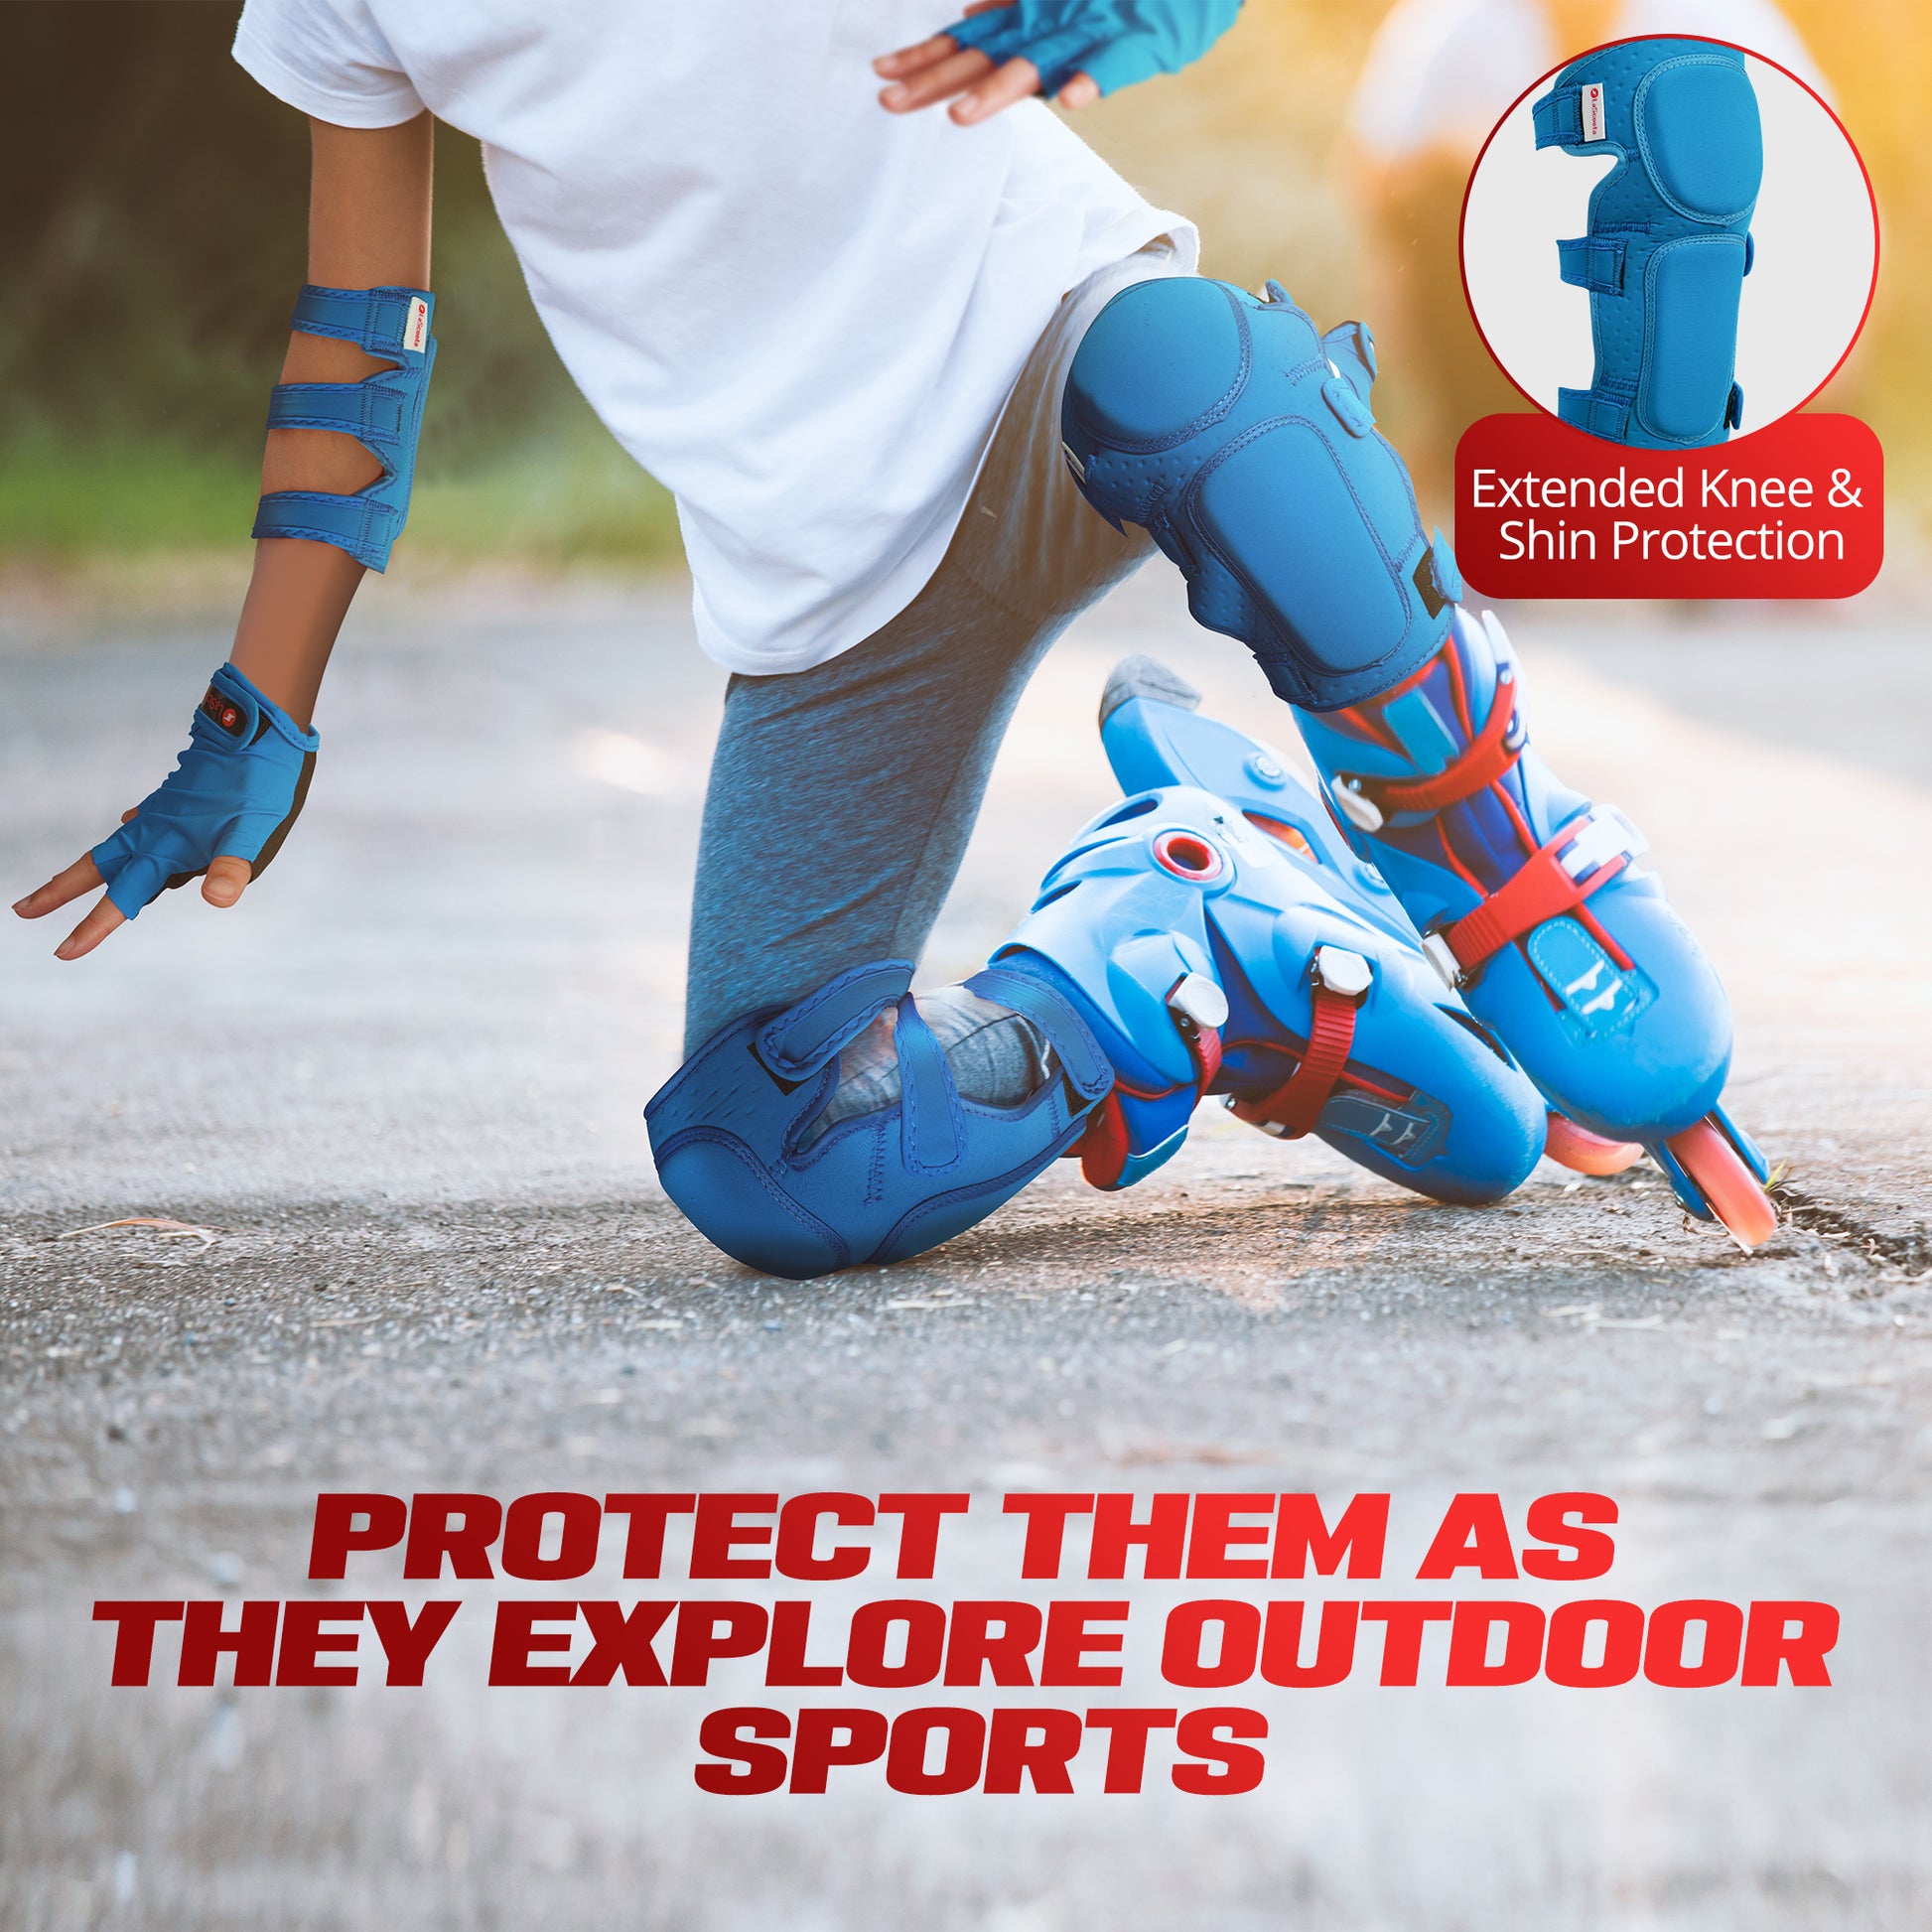 Safety Gear for Sports and Play - Seattle Children's